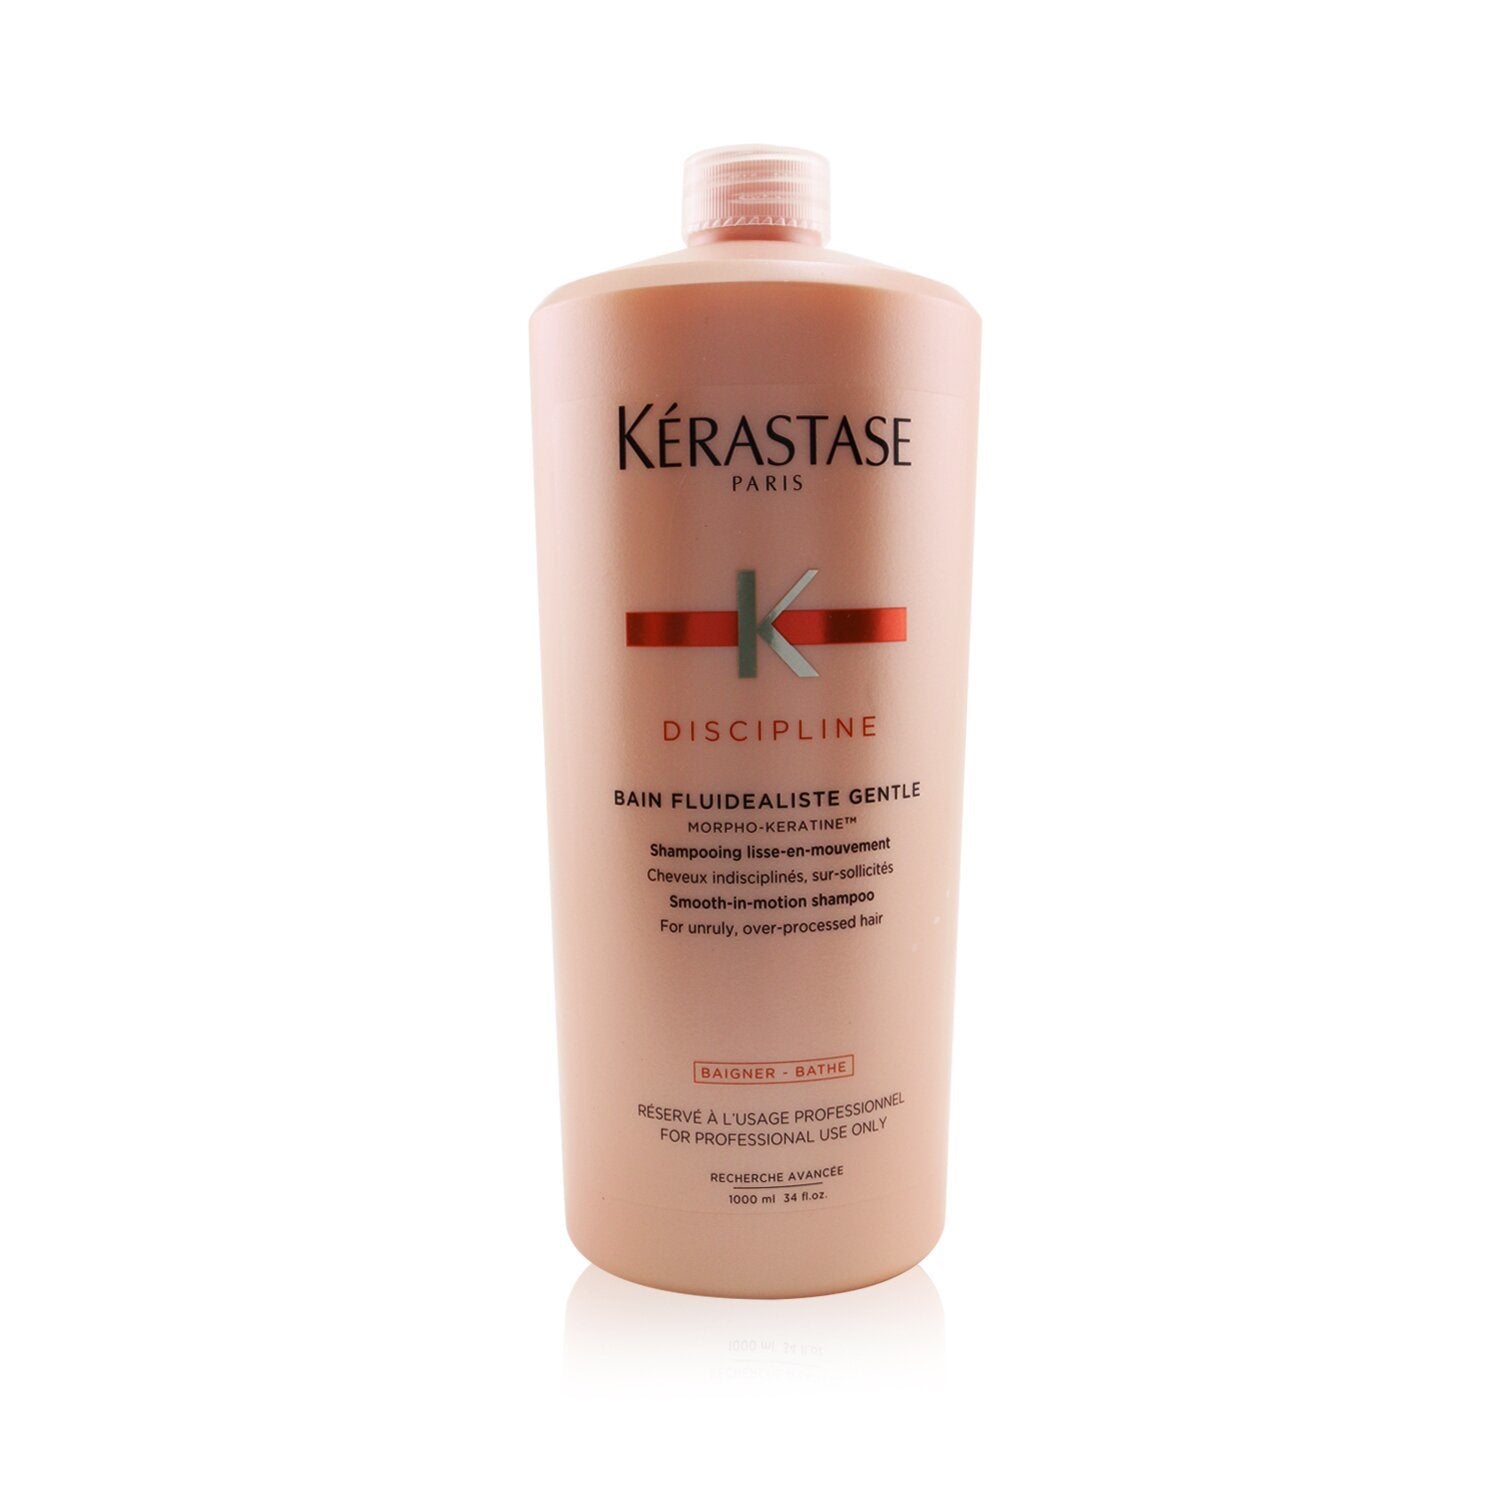 KERASTASE - Discipline Bain Fluidealiste Smooth-In-Motion Gentle Shampoo (For Unruly, Over-Processed Hair) - 1000ml/3.4oz 3P's Inclusive Beauty